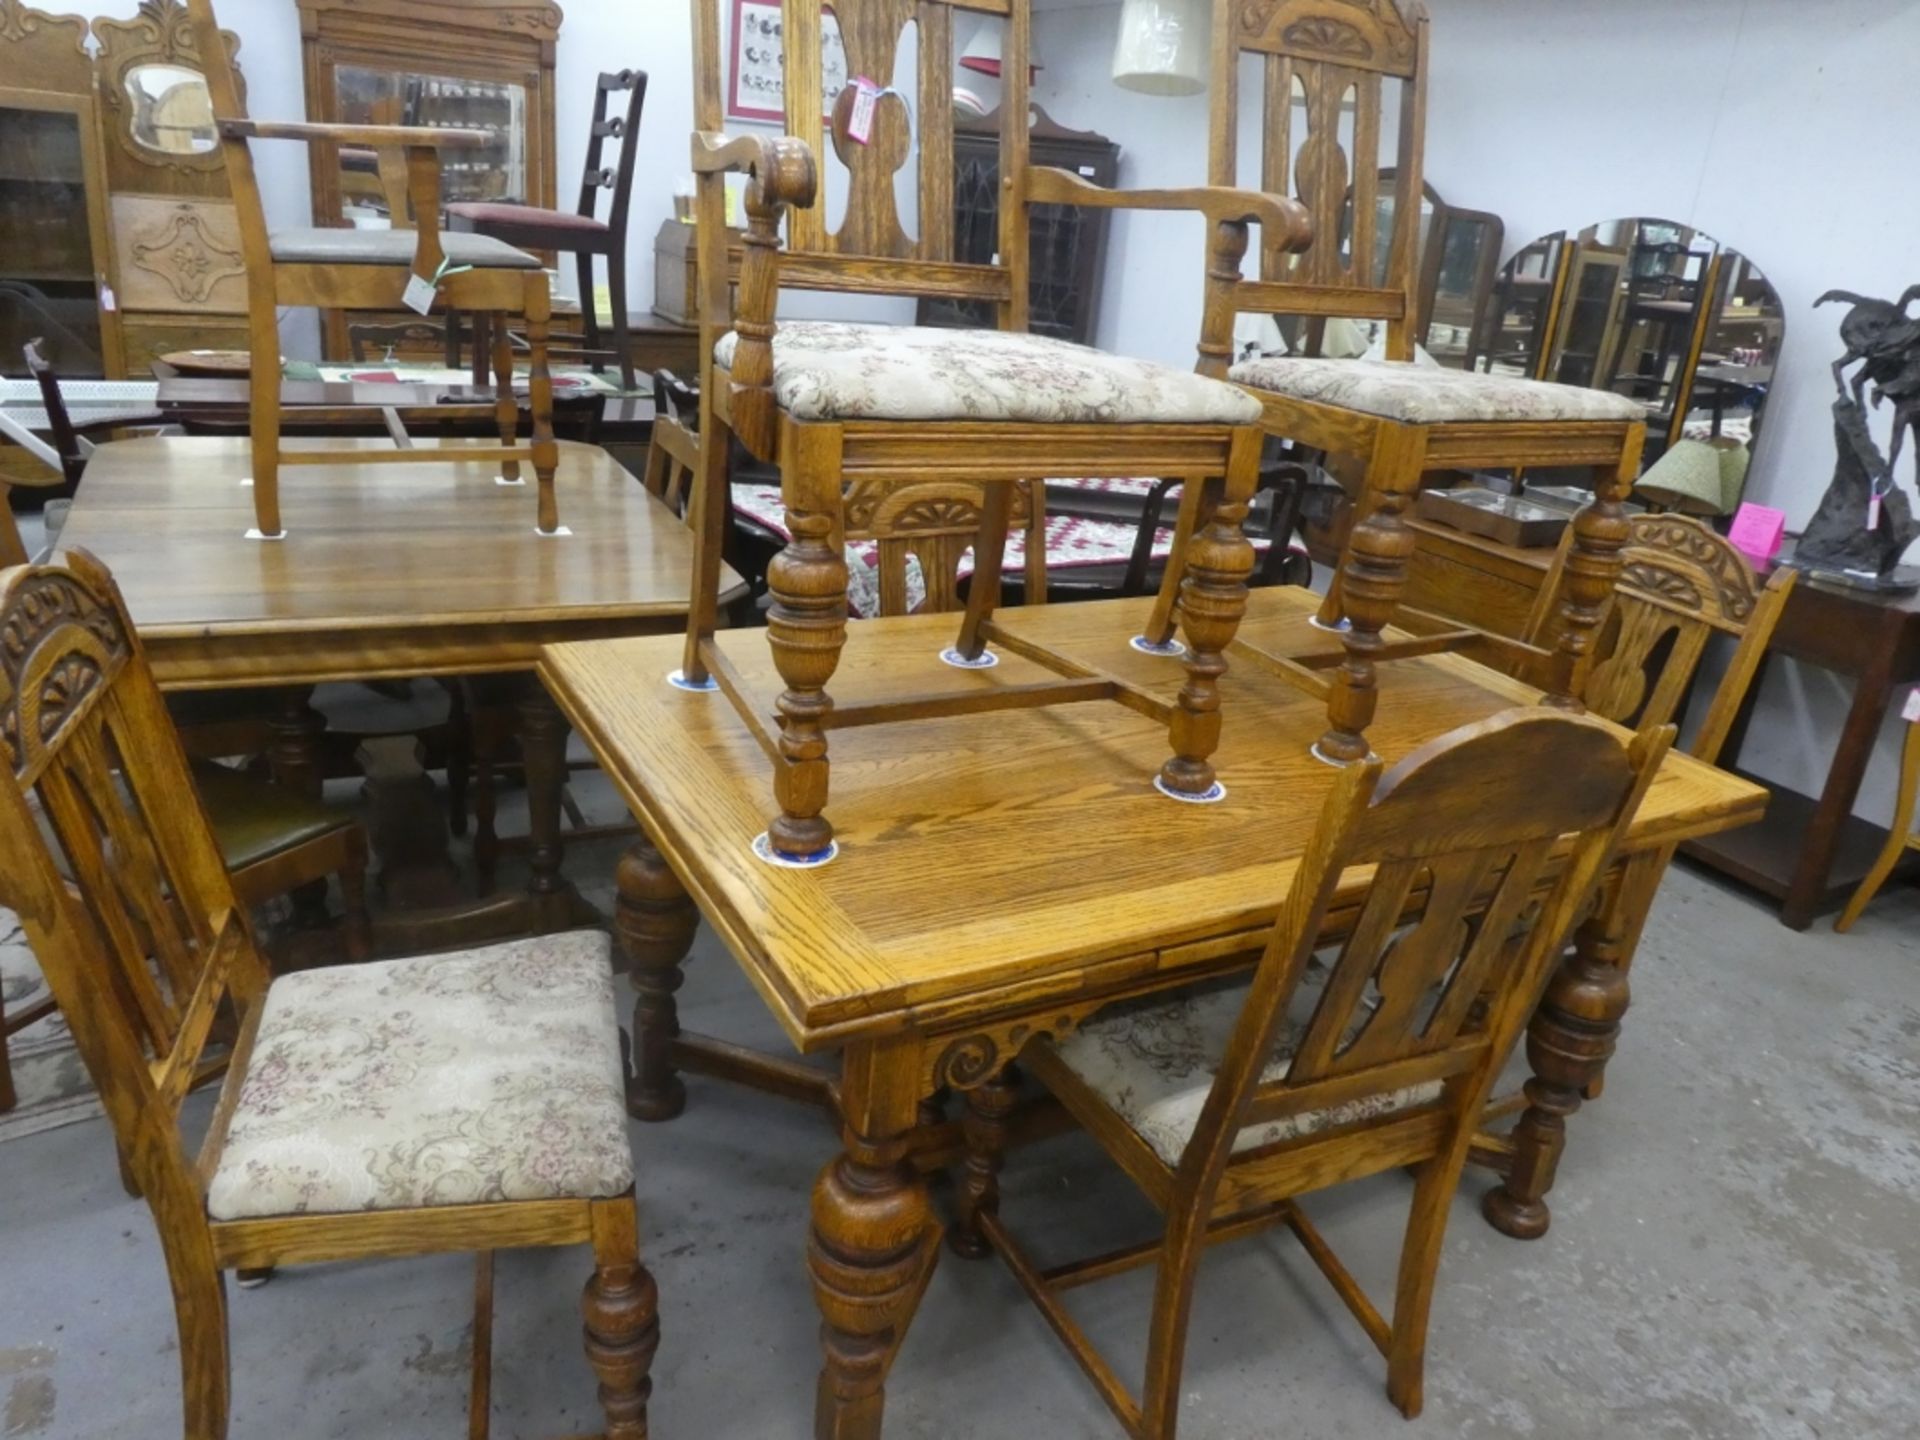 OAK TABLE & 6 CHAIRS 30"H 56"W 38"D EXTENDS TO 86"W